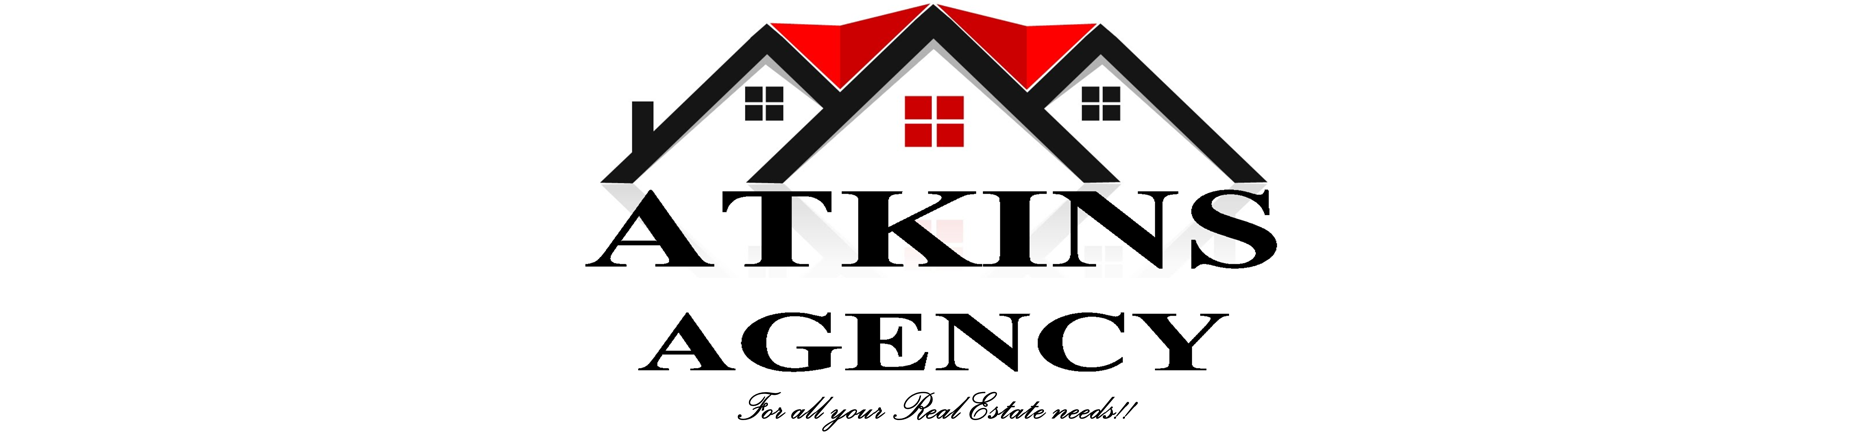 The Atkins Agency, Inc. - Baxley & Surrounding Area Homes for Sale!